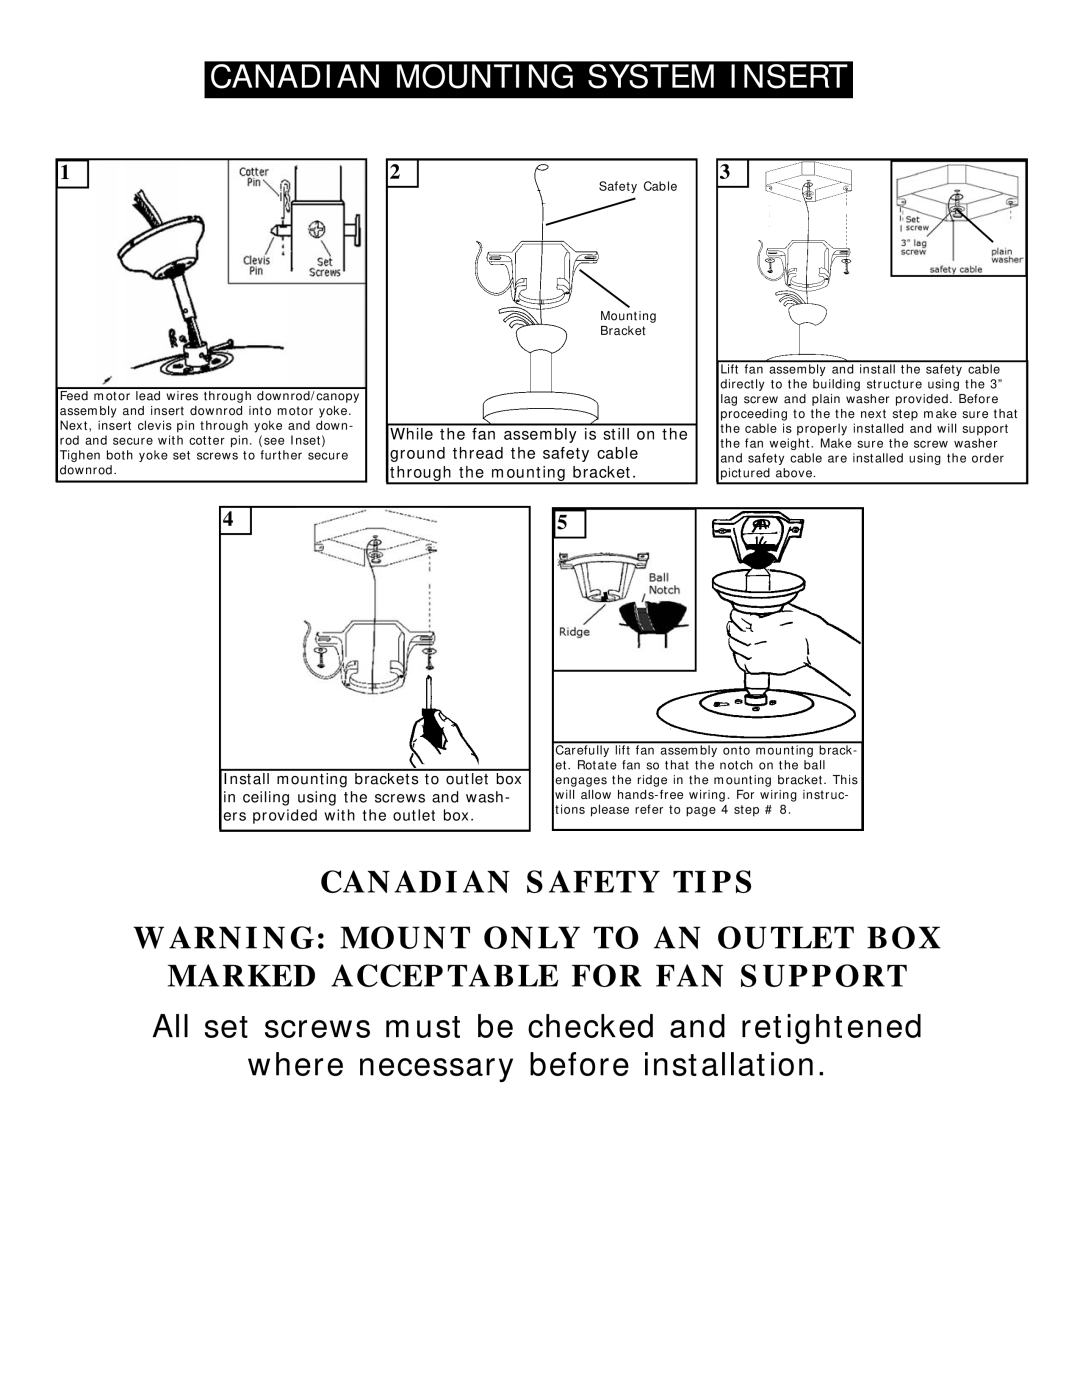 Monte Carlo Fan Company 5WFXX Canadian Safety Tips, While the fan assembly is still on the, ground thread the safety cable 